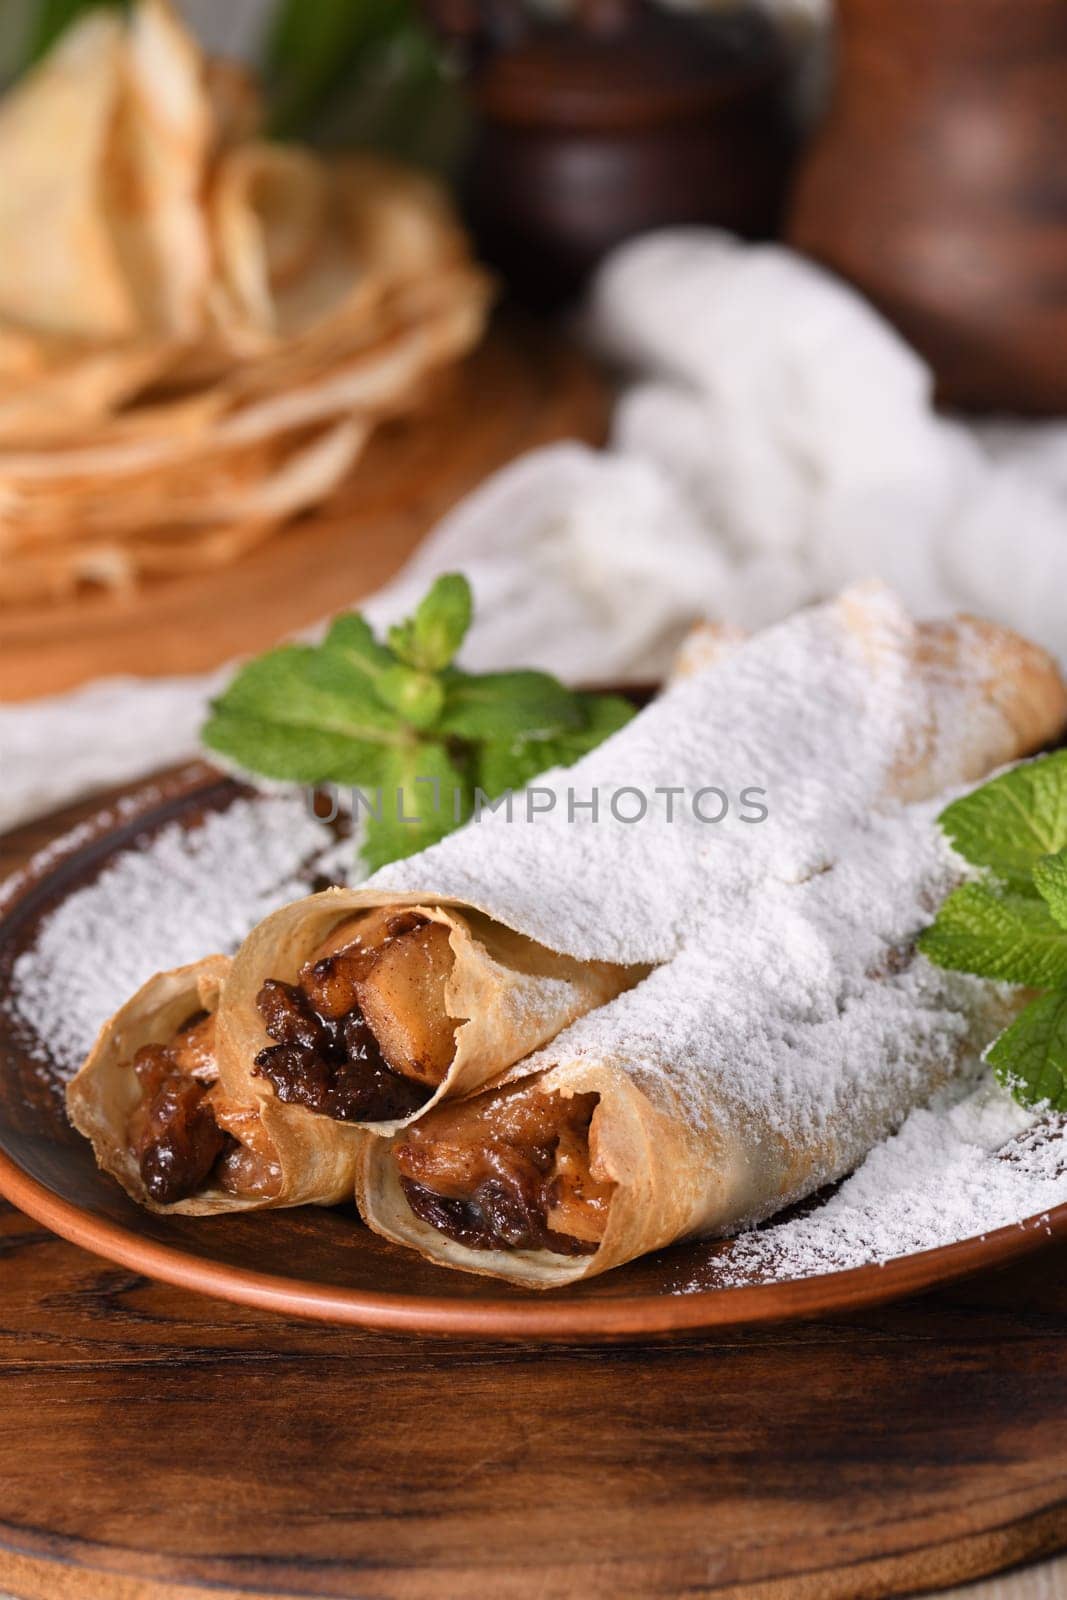 Homemade thin crepe (pancakes) with apple filling by Apolonia